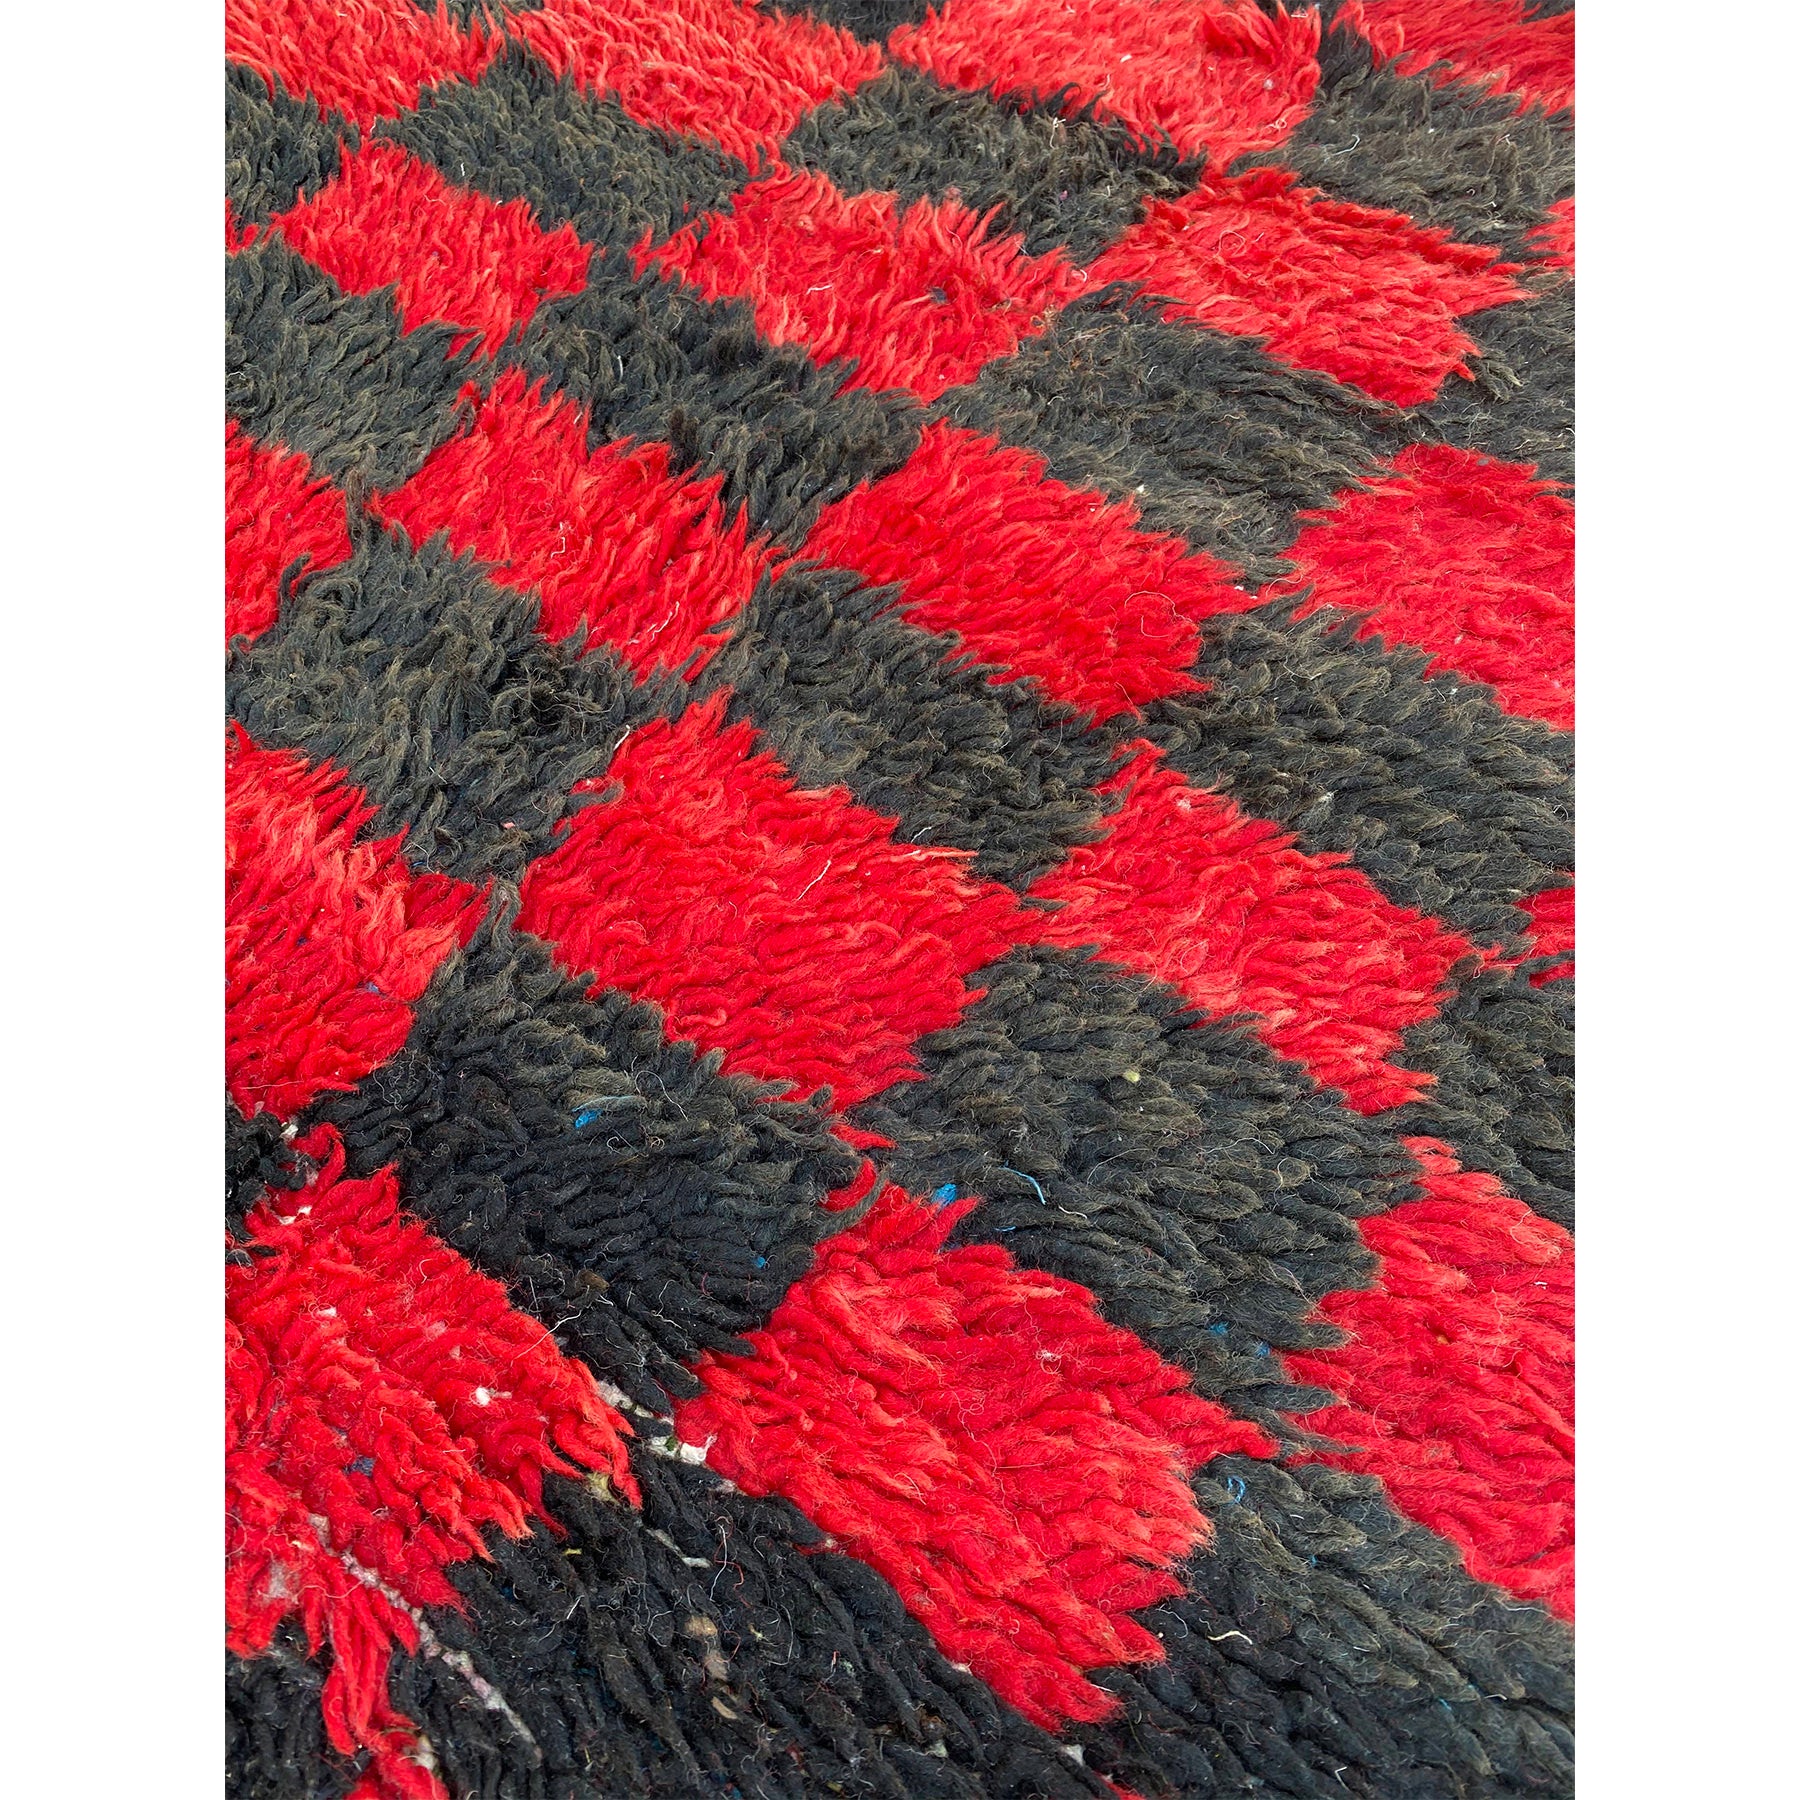 Vintage Moroccan throw rug with checkerboard print in red & black - Kantara | Moroccan Rugs